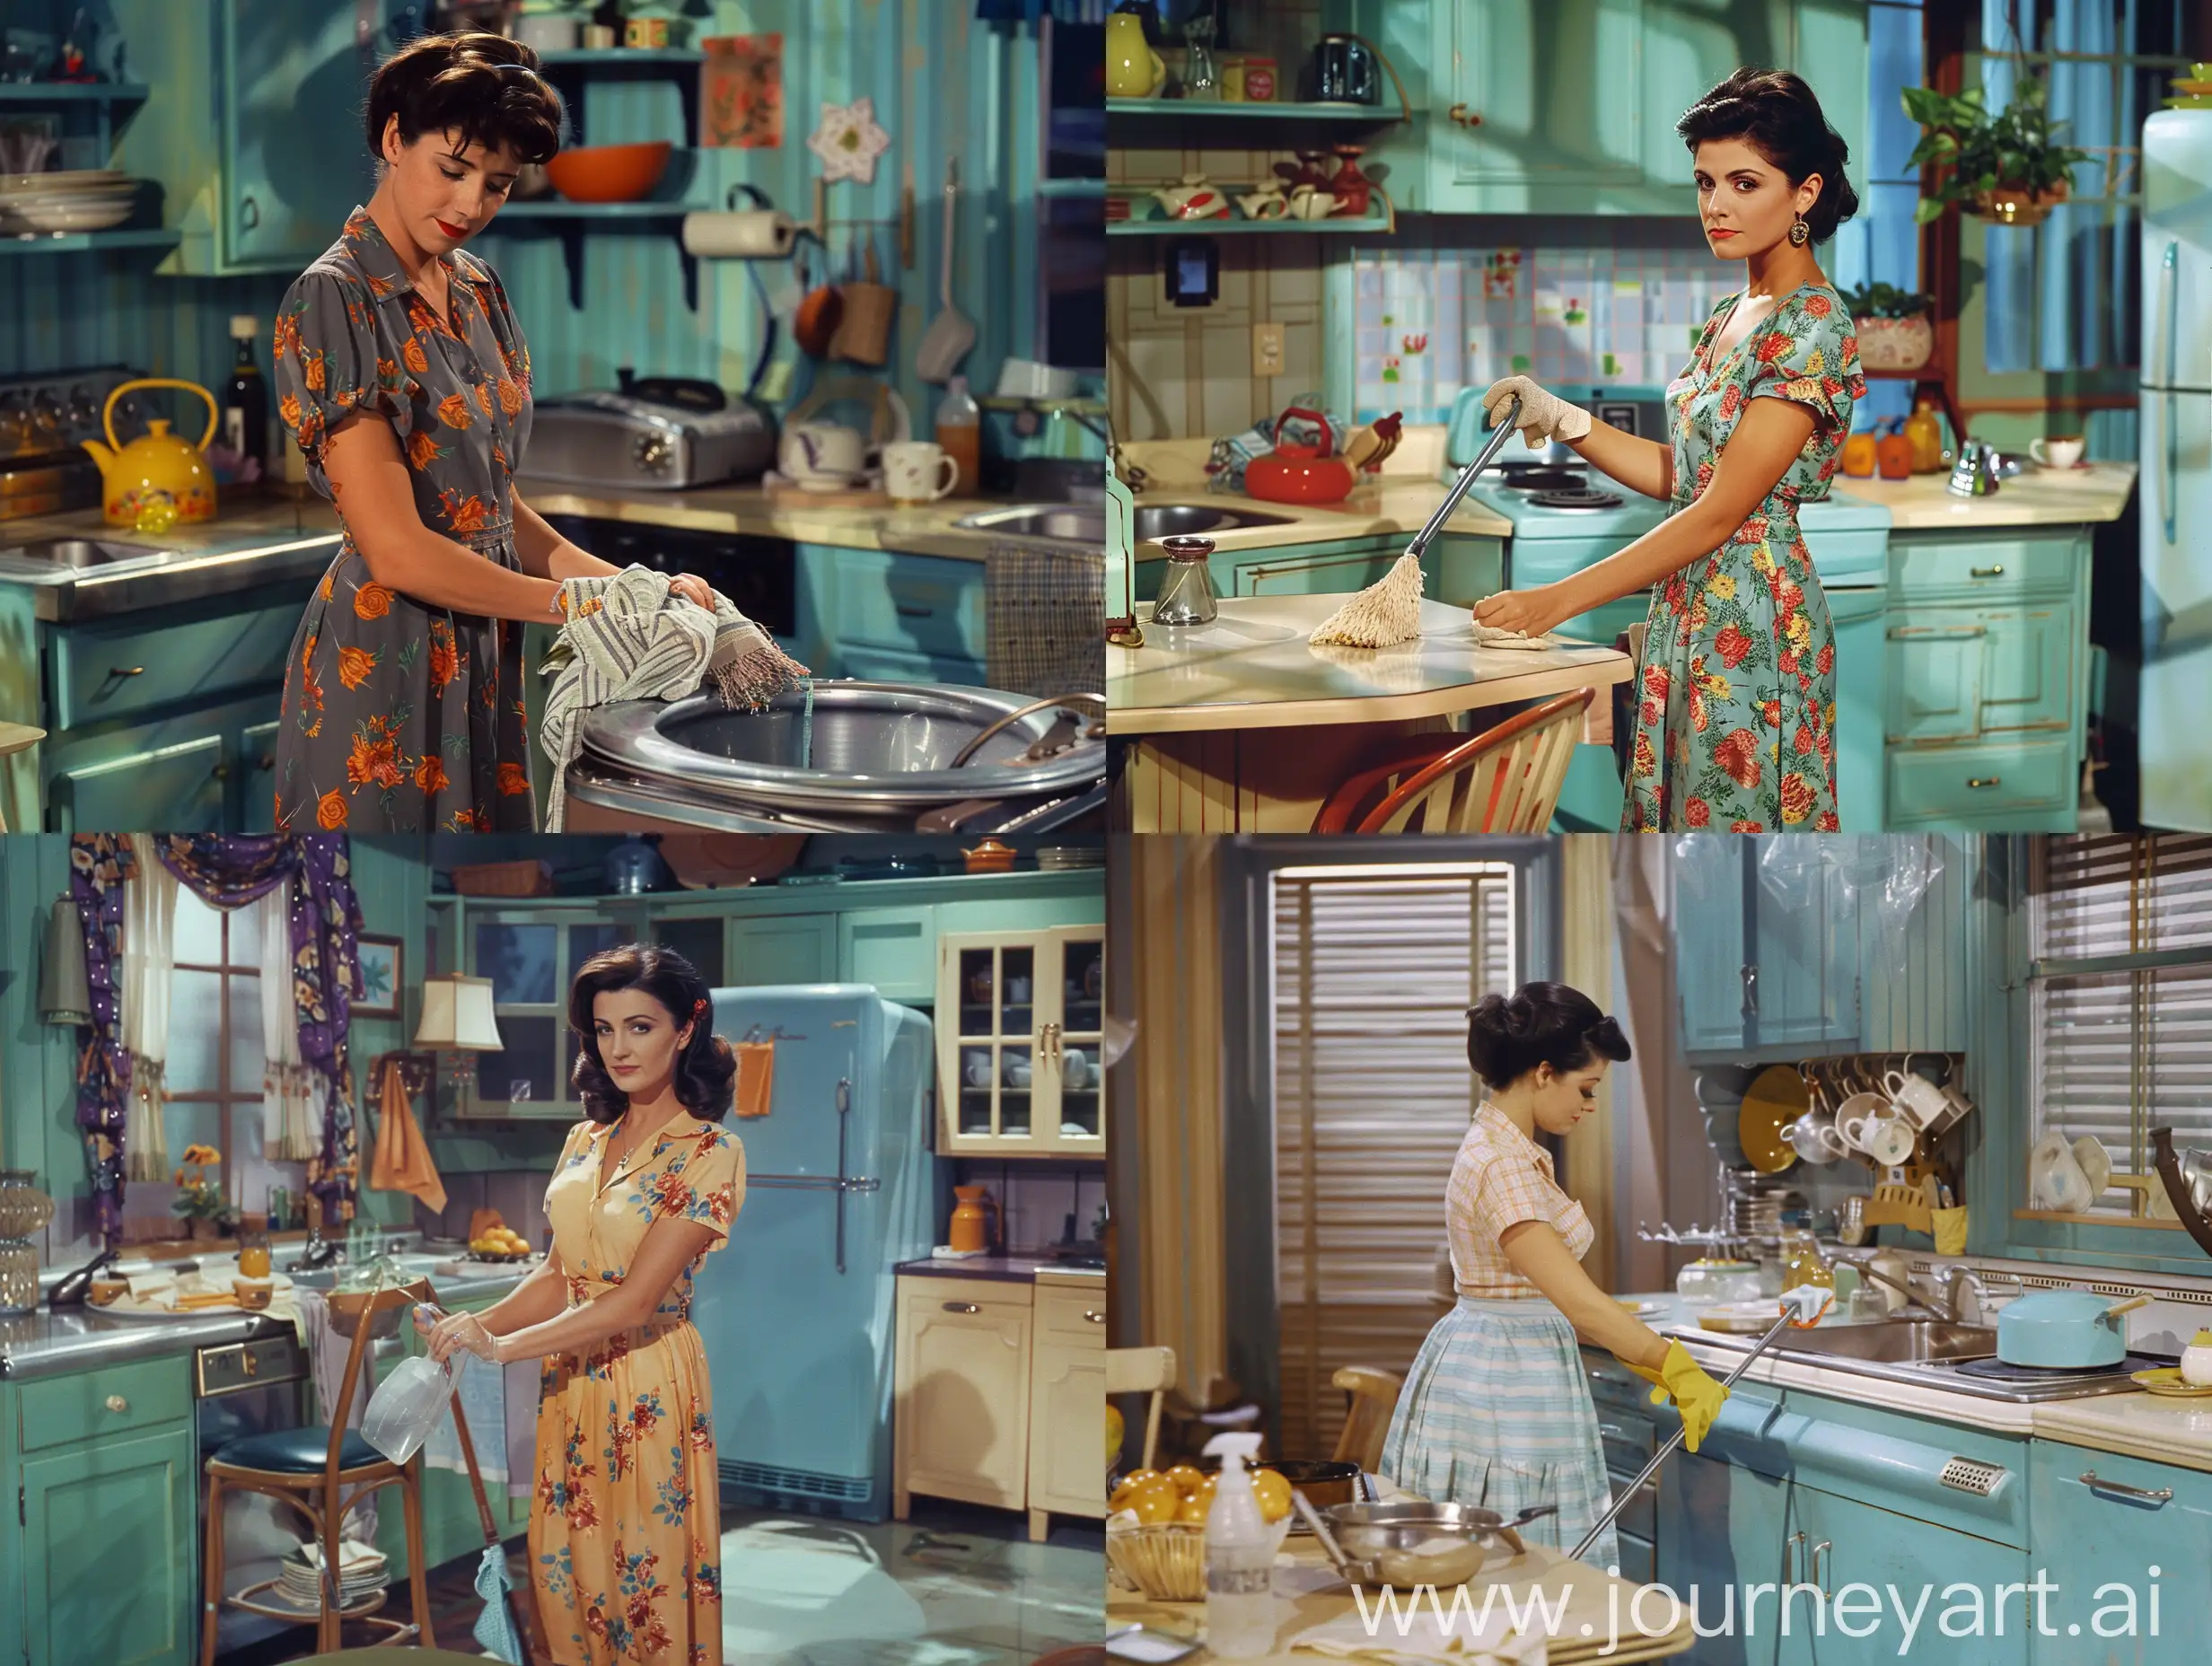 Monica-Geller-Cleaning-House-in-1950s-Style-Colory-Super-Panavision-70-Film-Image